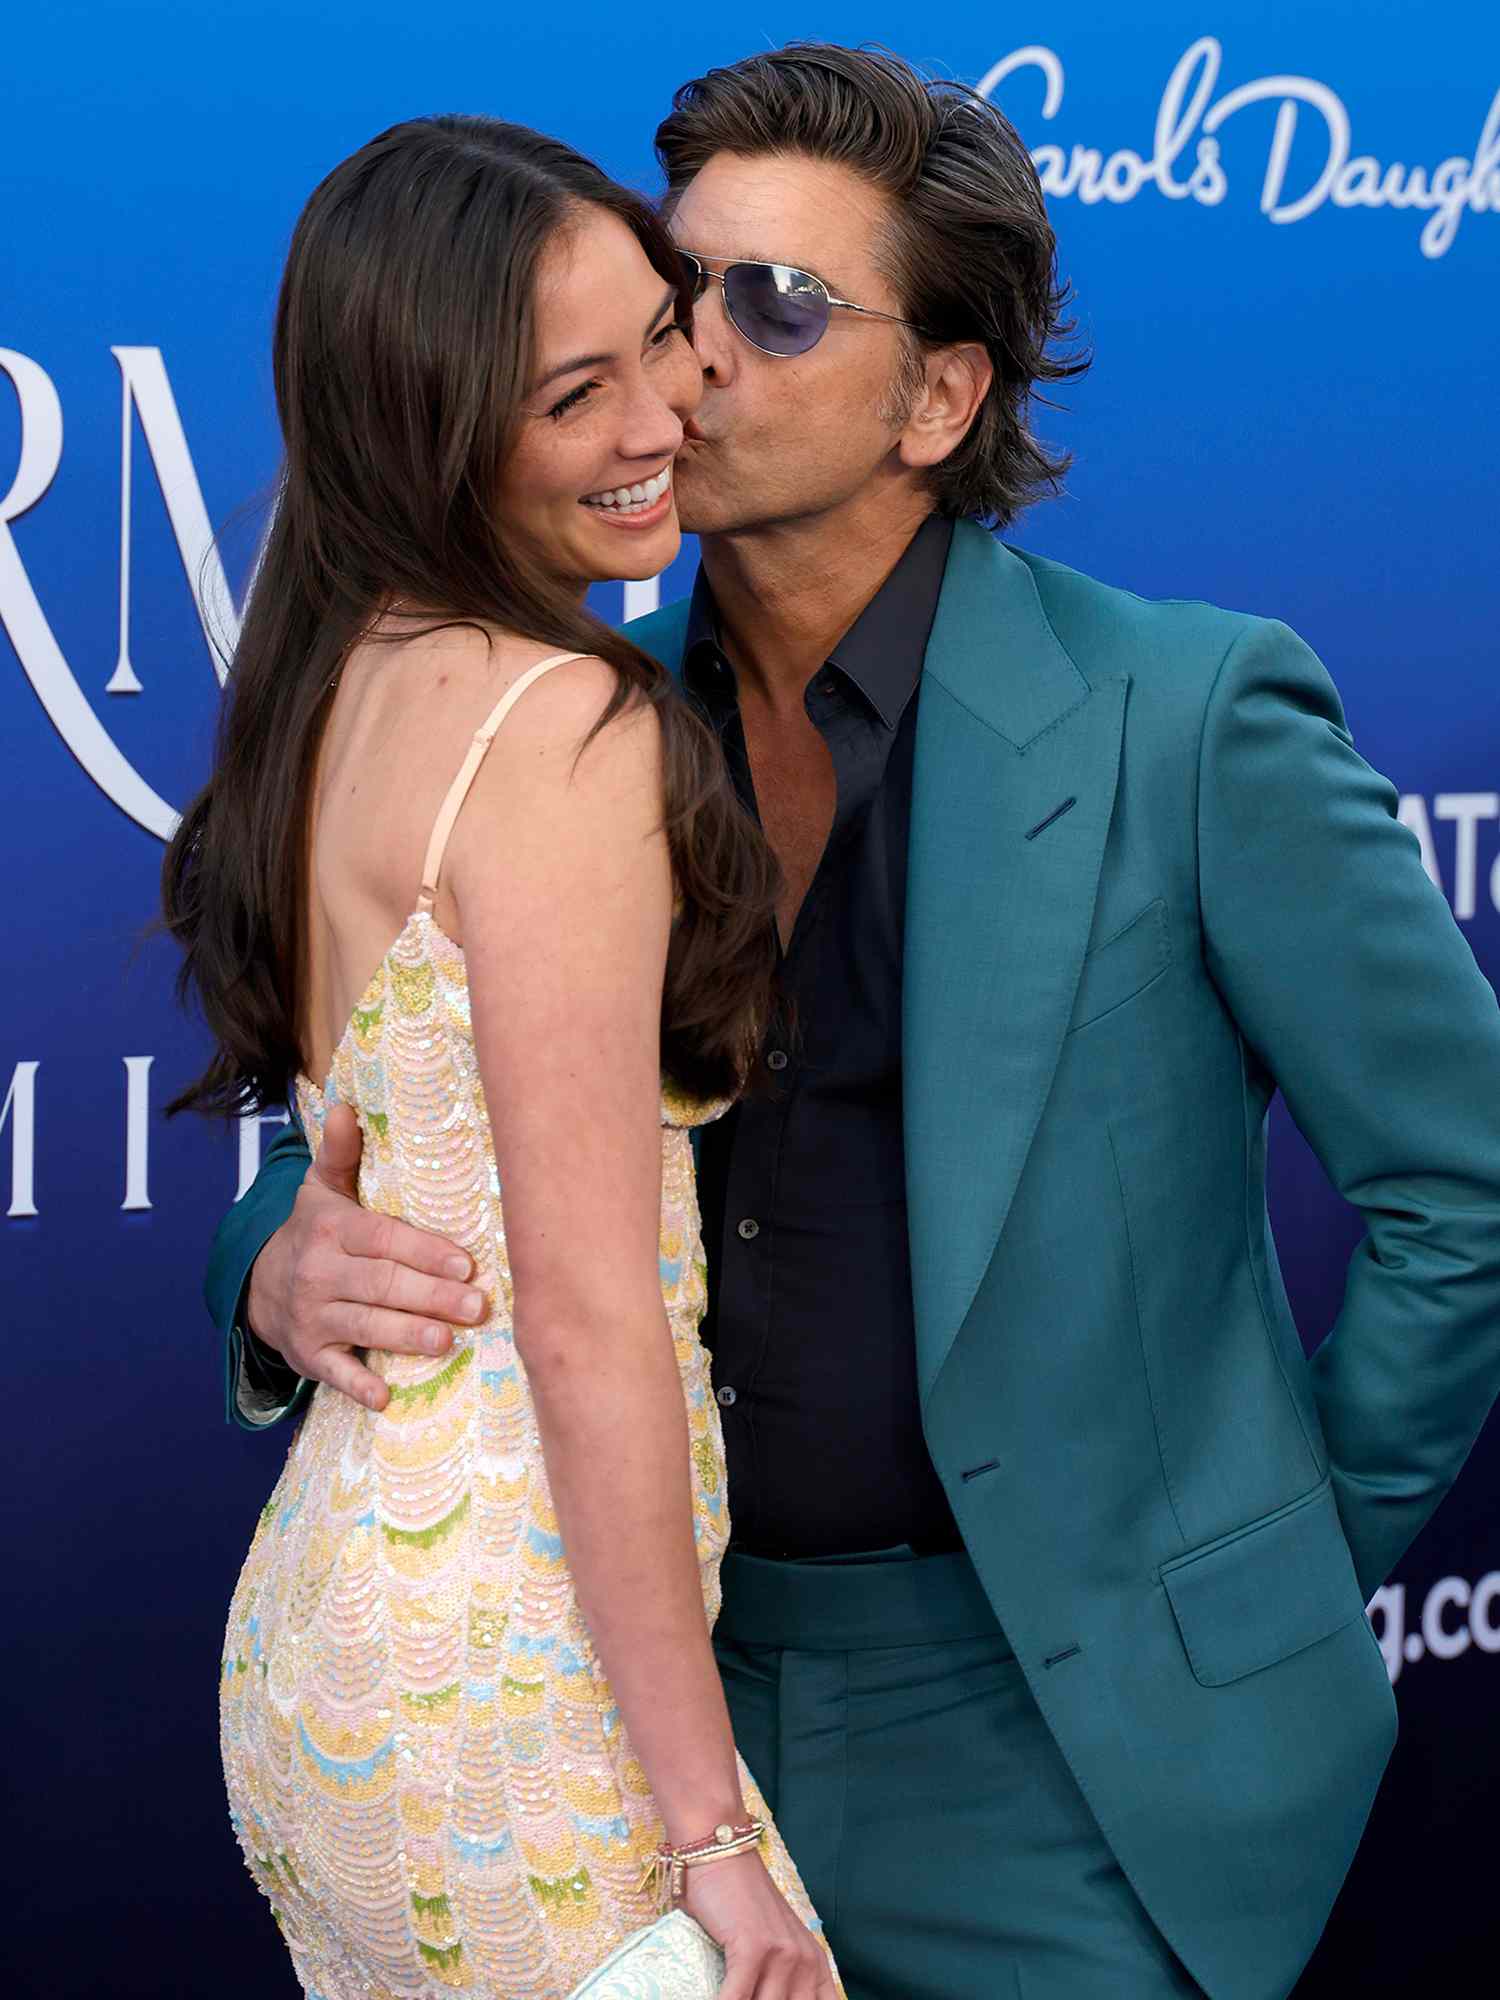 Caitlin McHugh and John Stamos attend the world premiere of Disney's "The Little Mermaid" on May 08, 2023